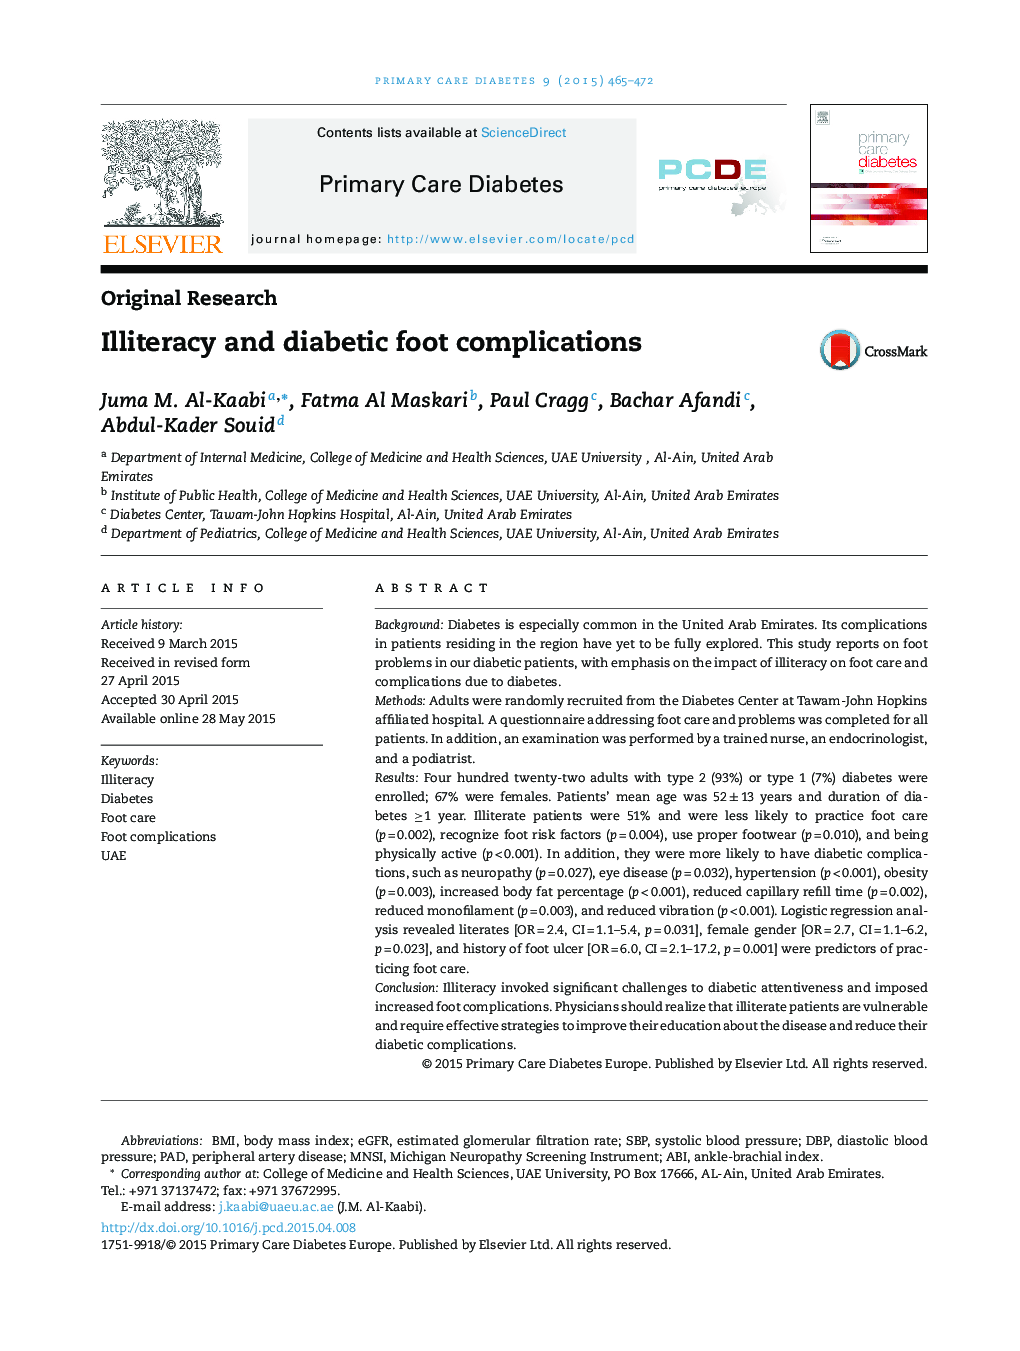 Illiteracy and diabetic foot complications